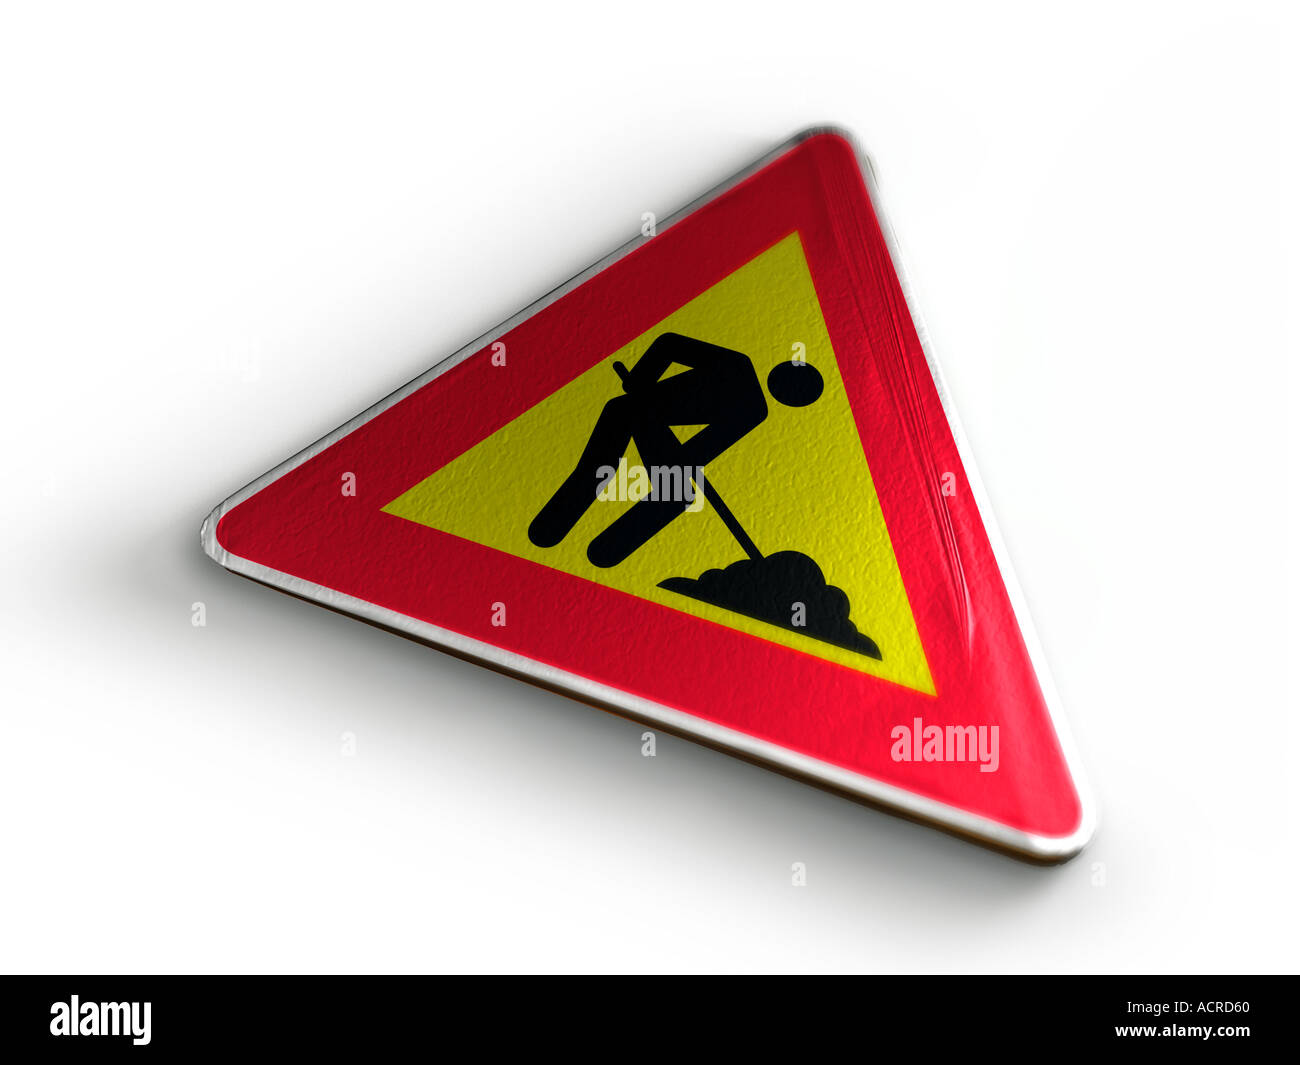 Illustration of a traffic sign Stock Photo